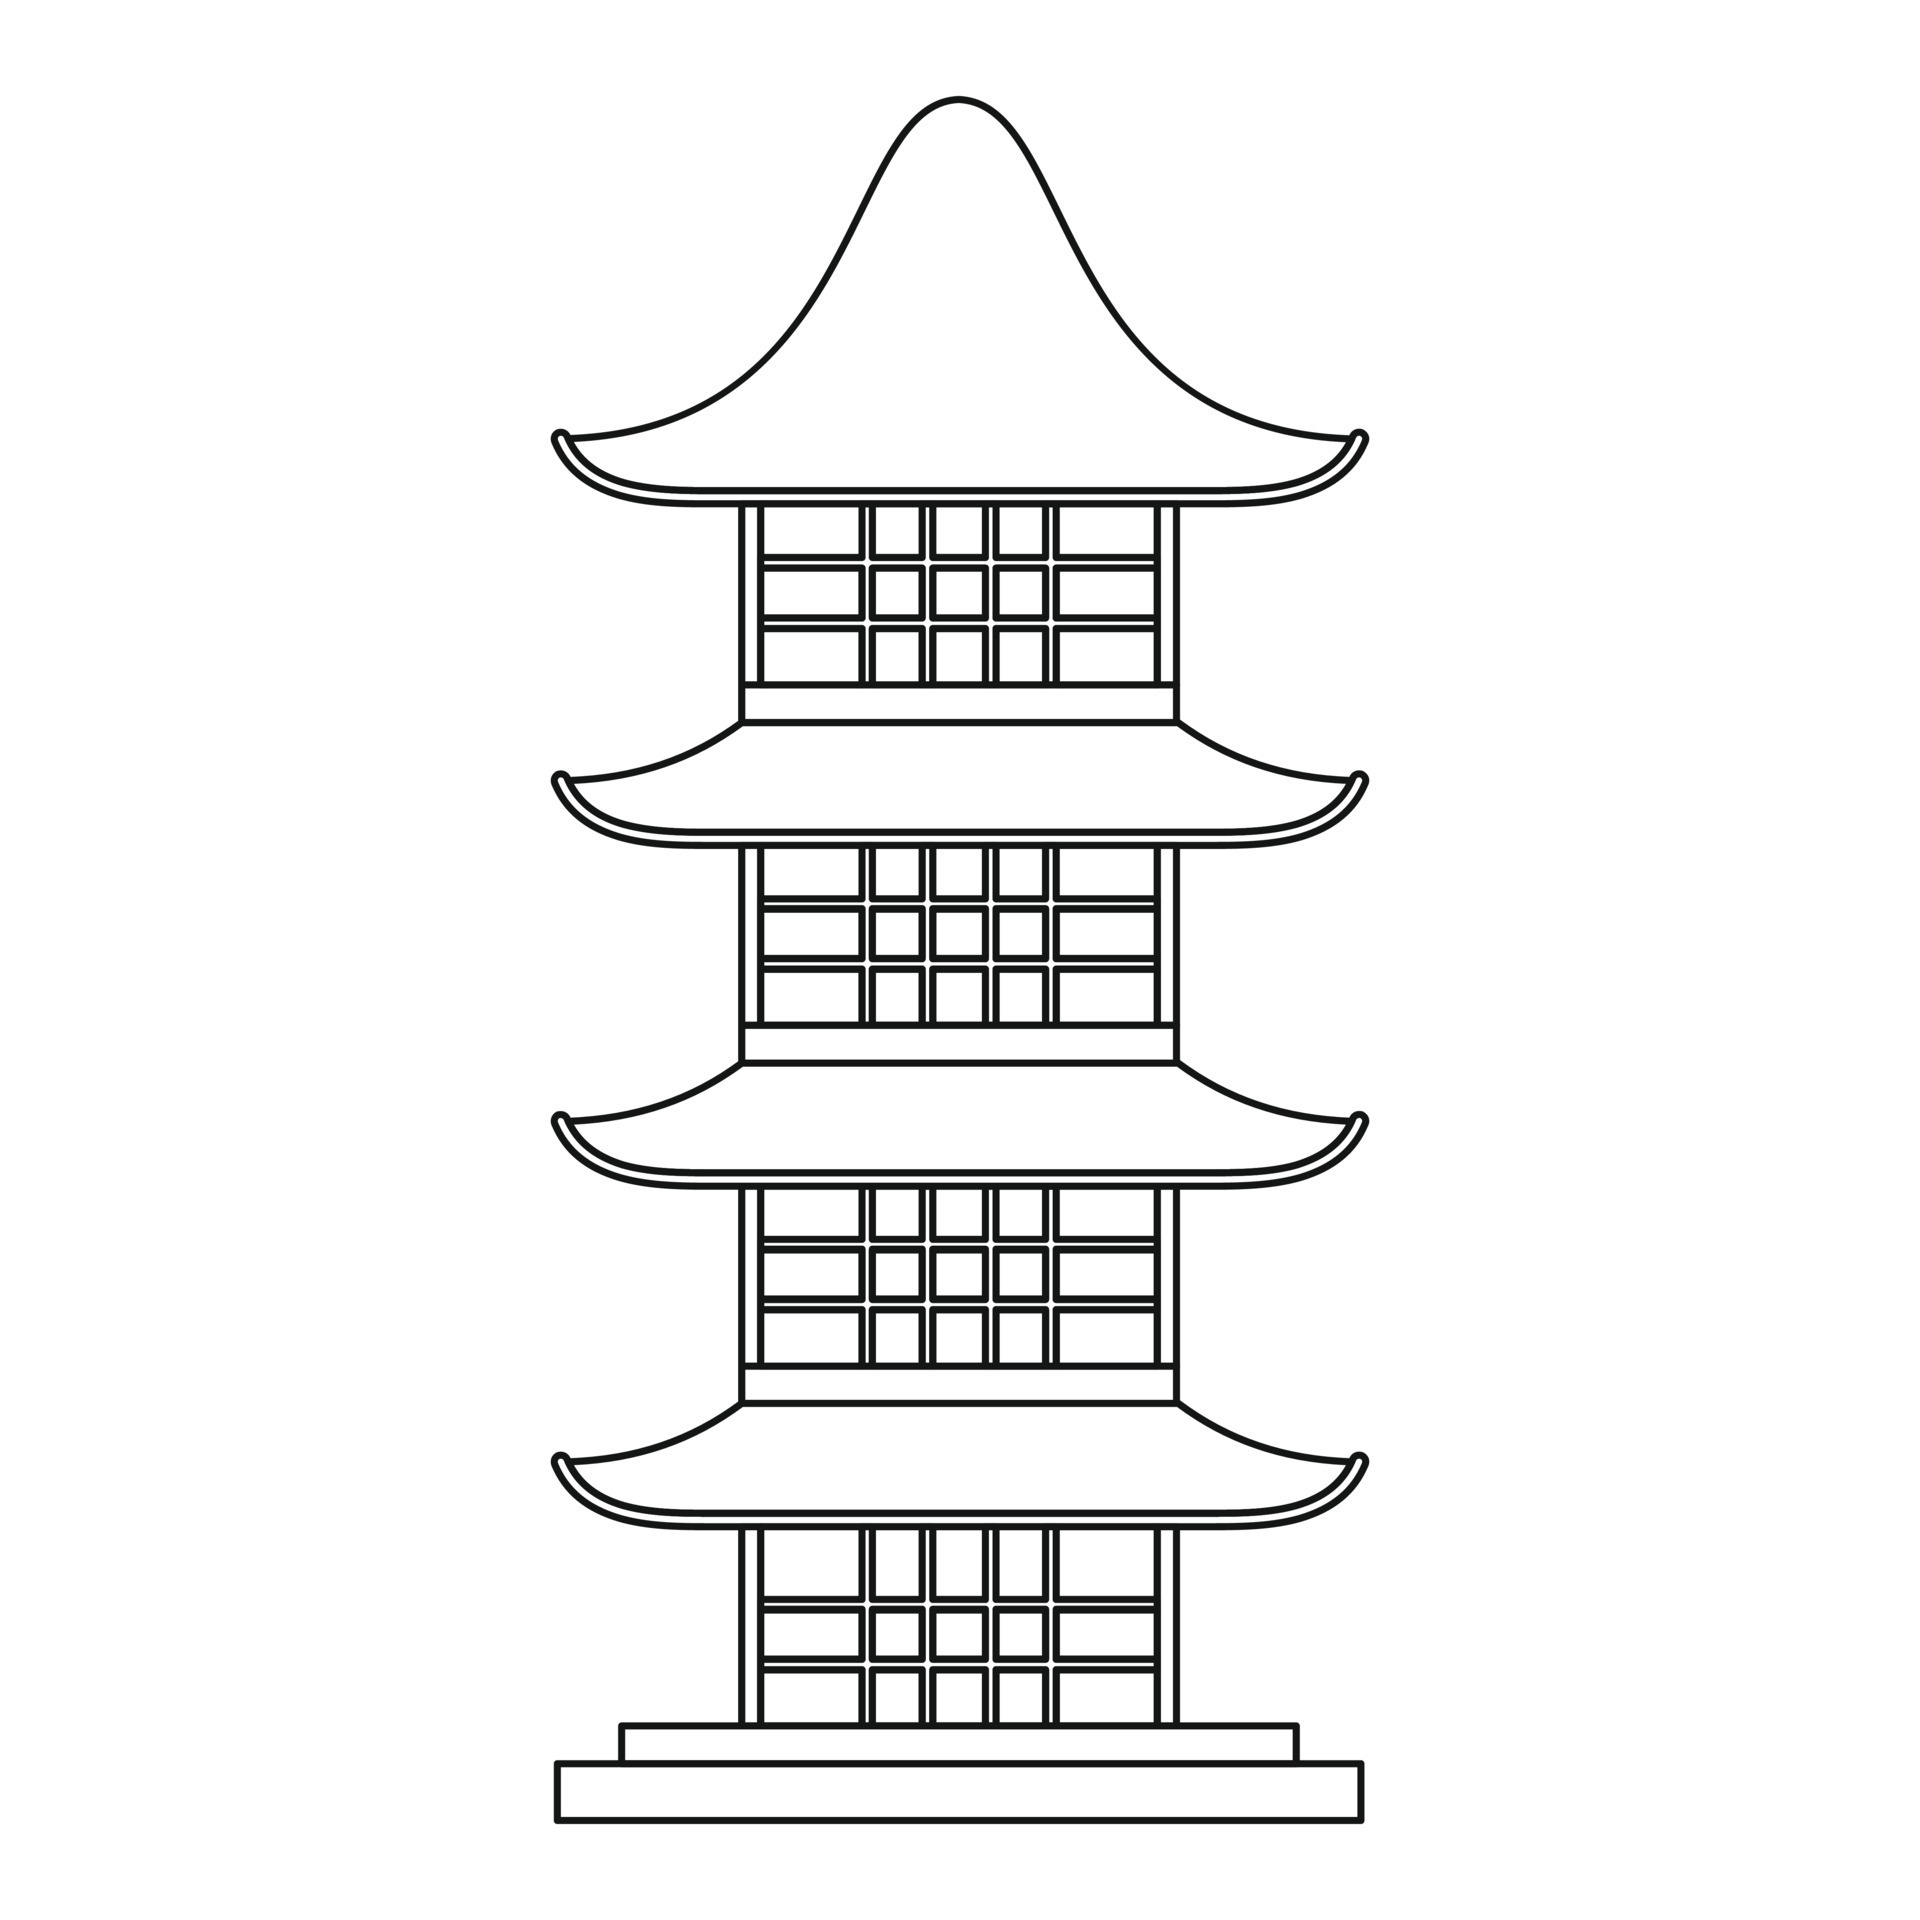 5,074 Japanese Temple Drawing Images, Stock Photos & Vectors | Shutterstock